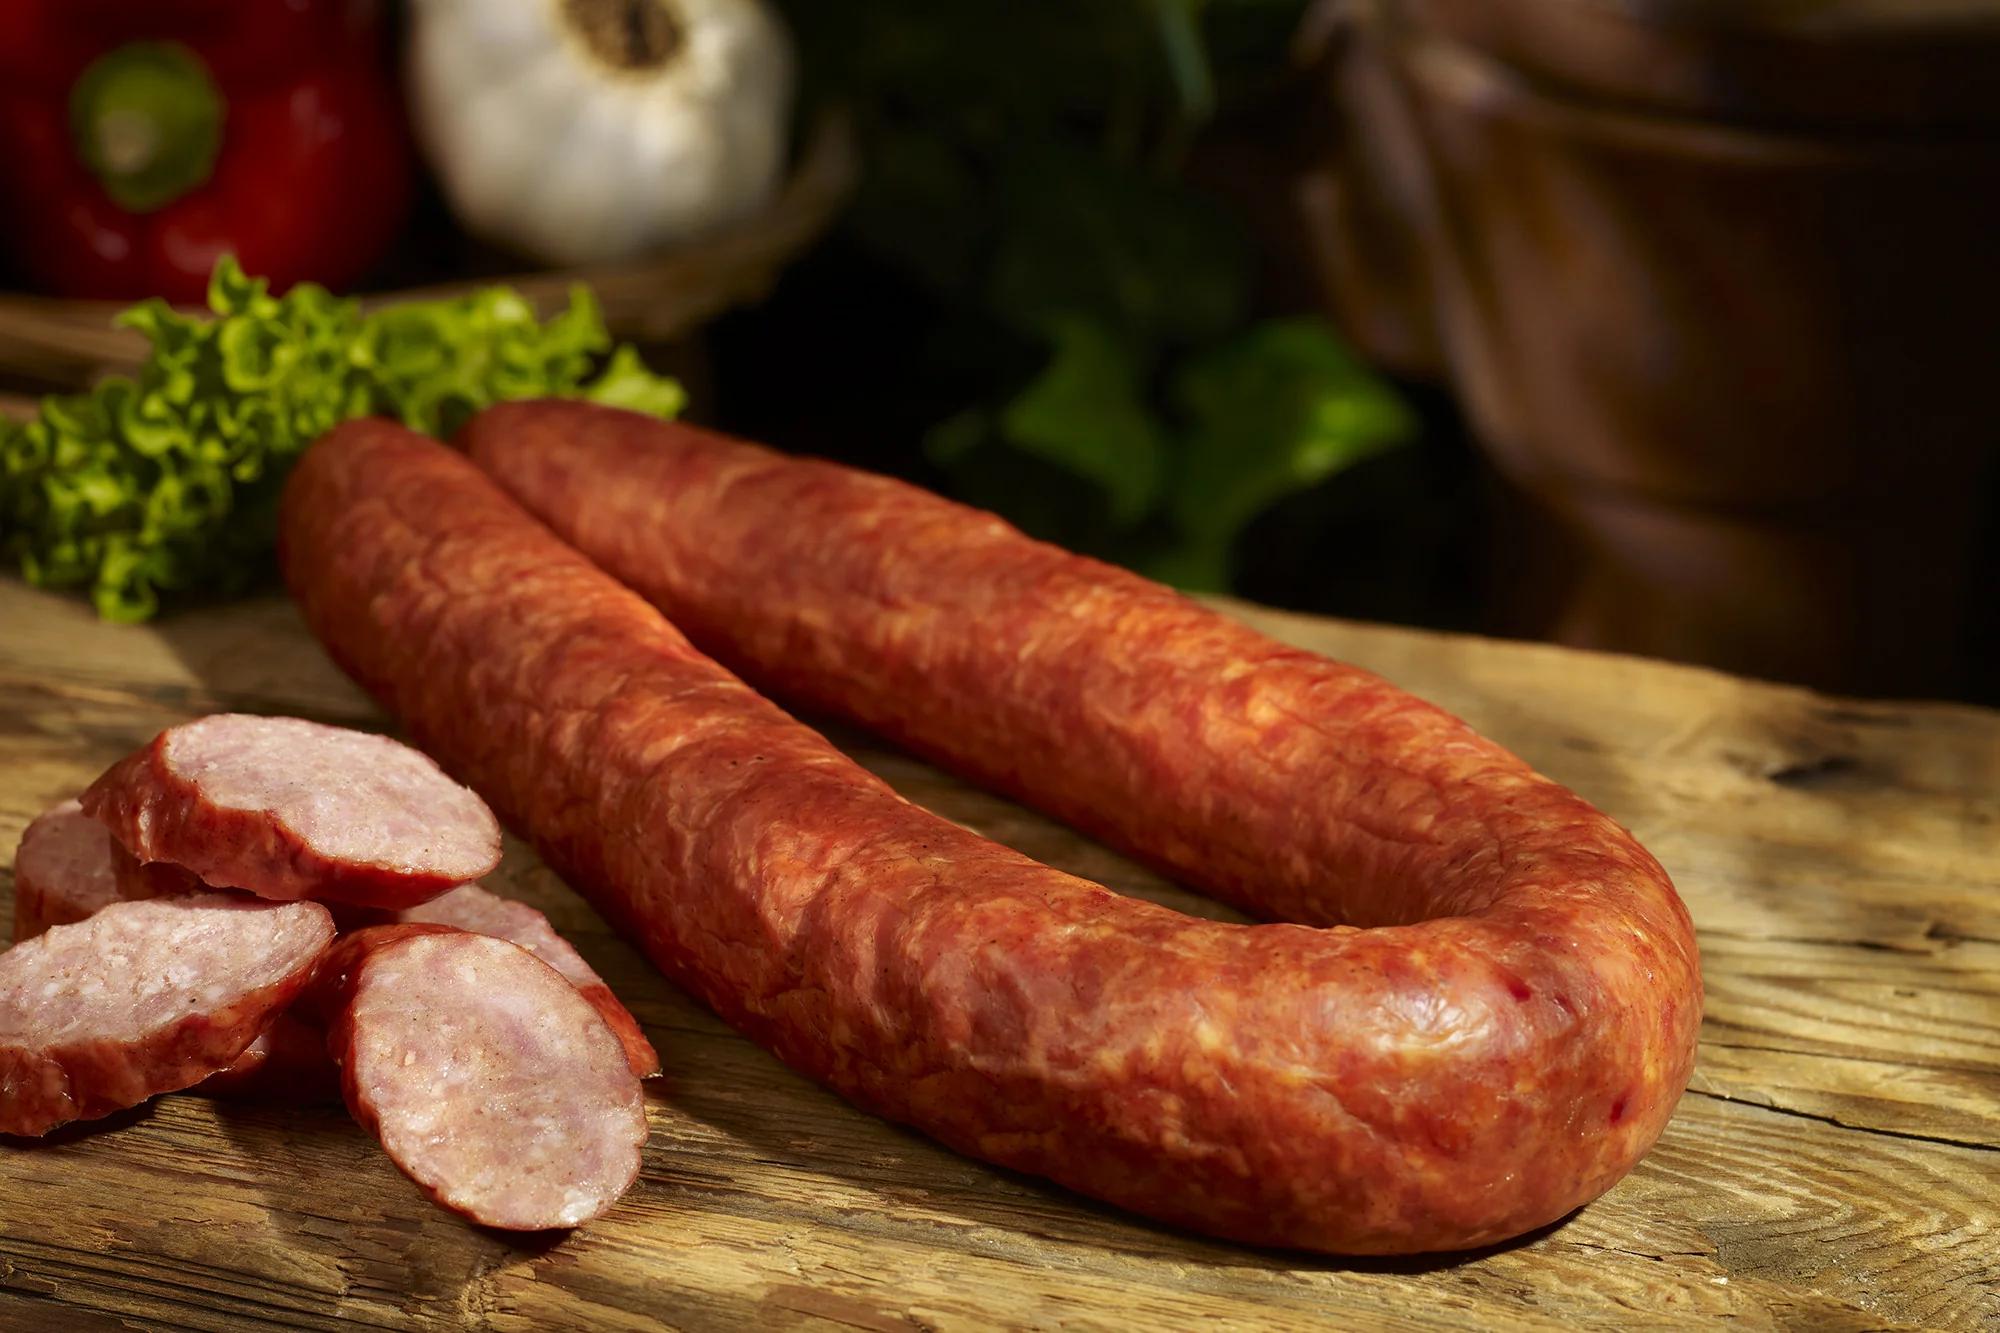 lean smoked sausage - Is sausage a lean food